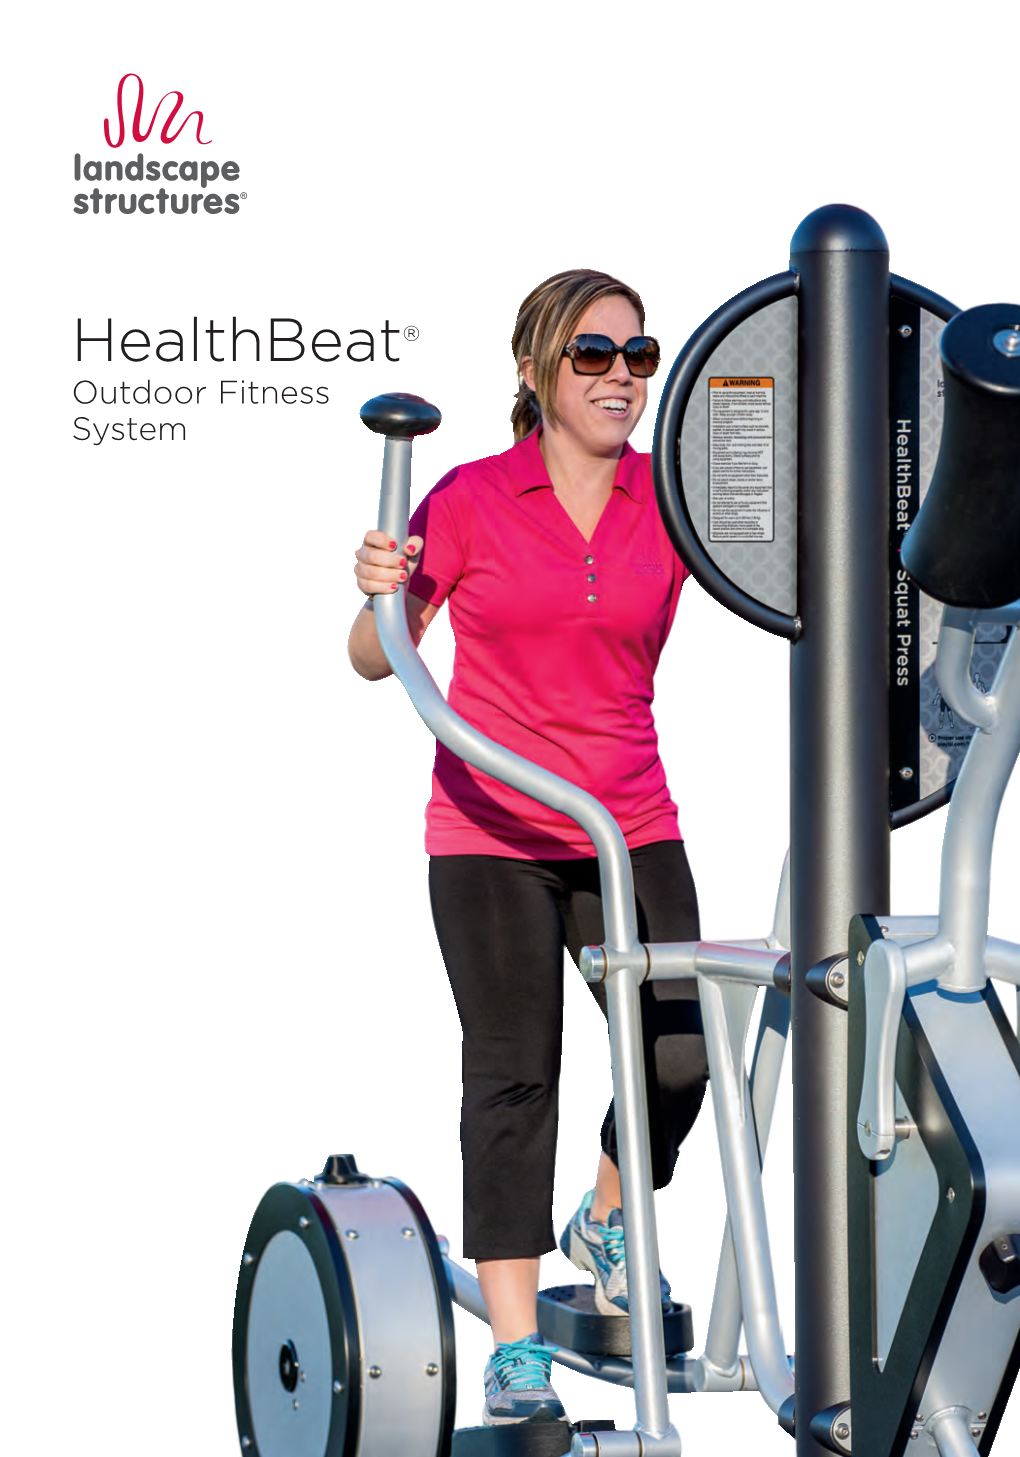 Healthbeat® Outdoor Fitness System Watch Healthbeat in Action at Playlsi.Com/Hb